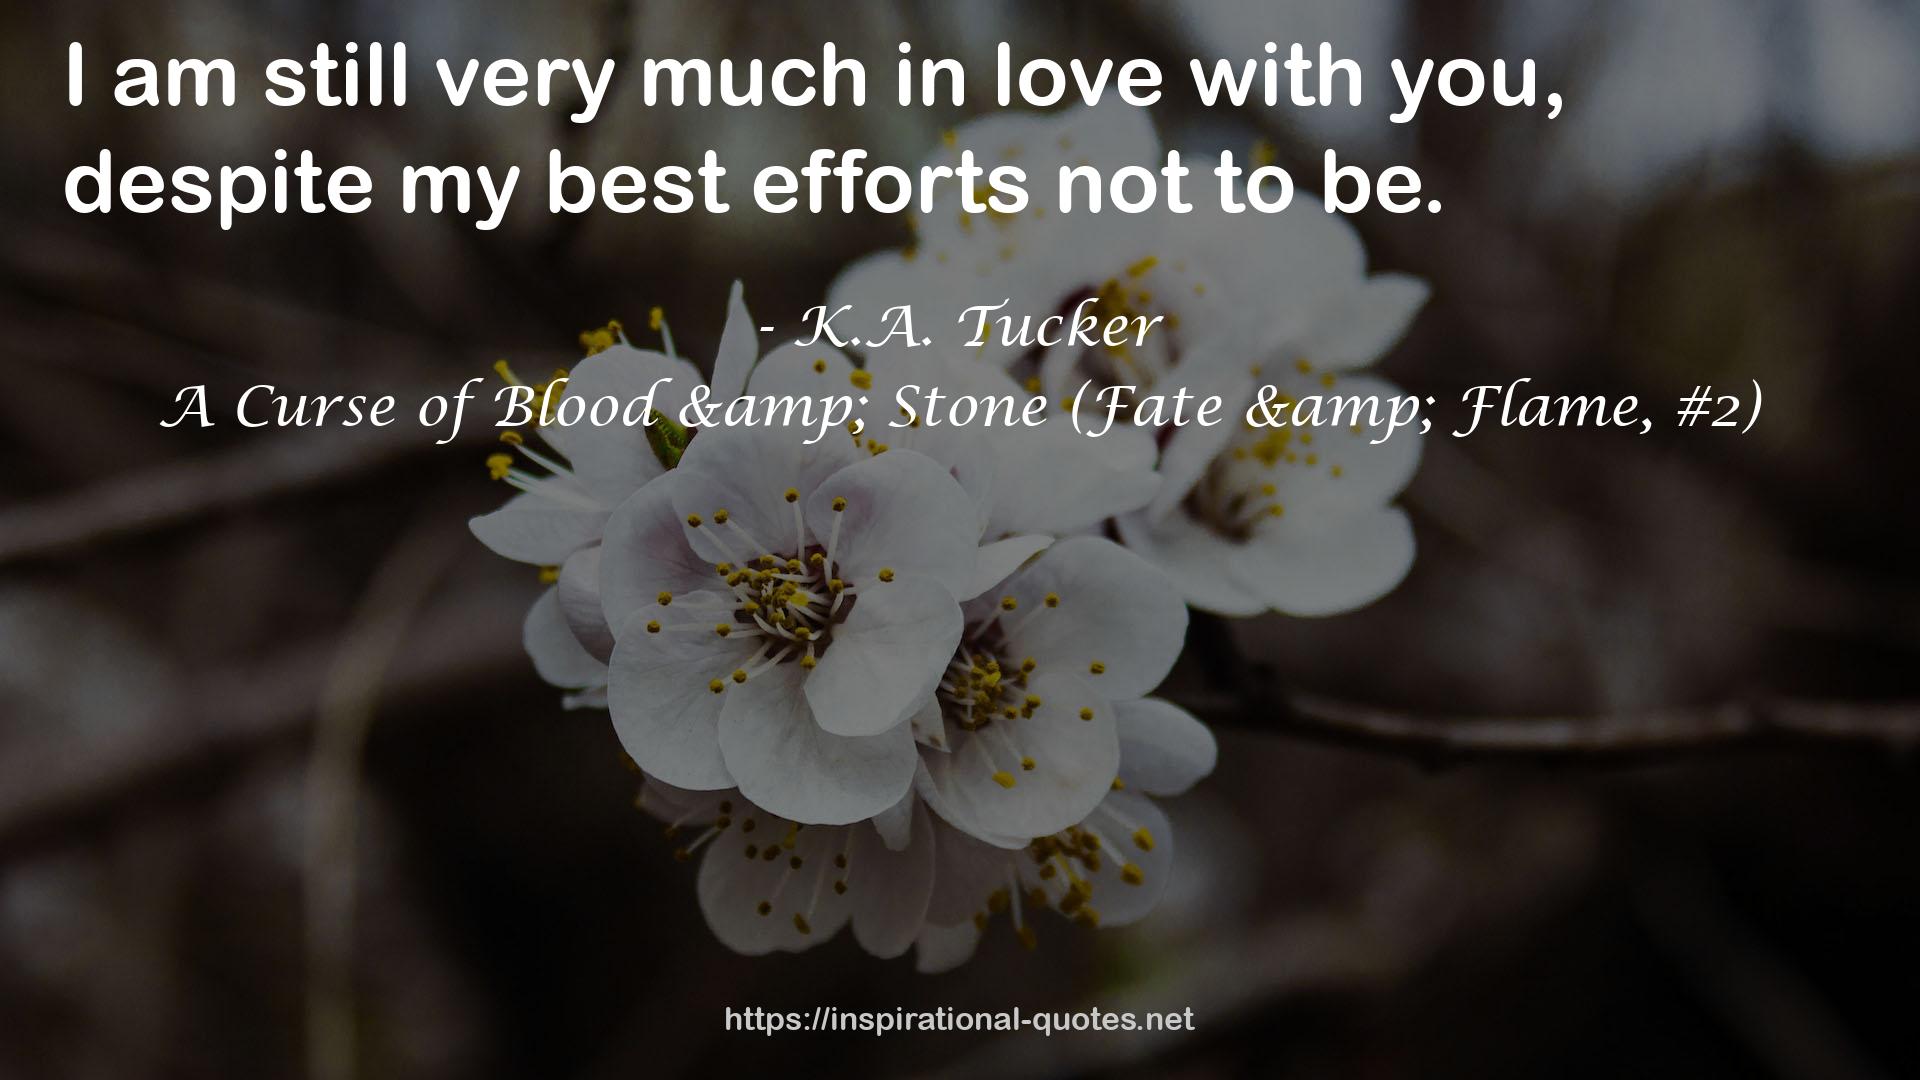 A Curse of Blood & Stone (Fate & Flame, #2) QUOTES